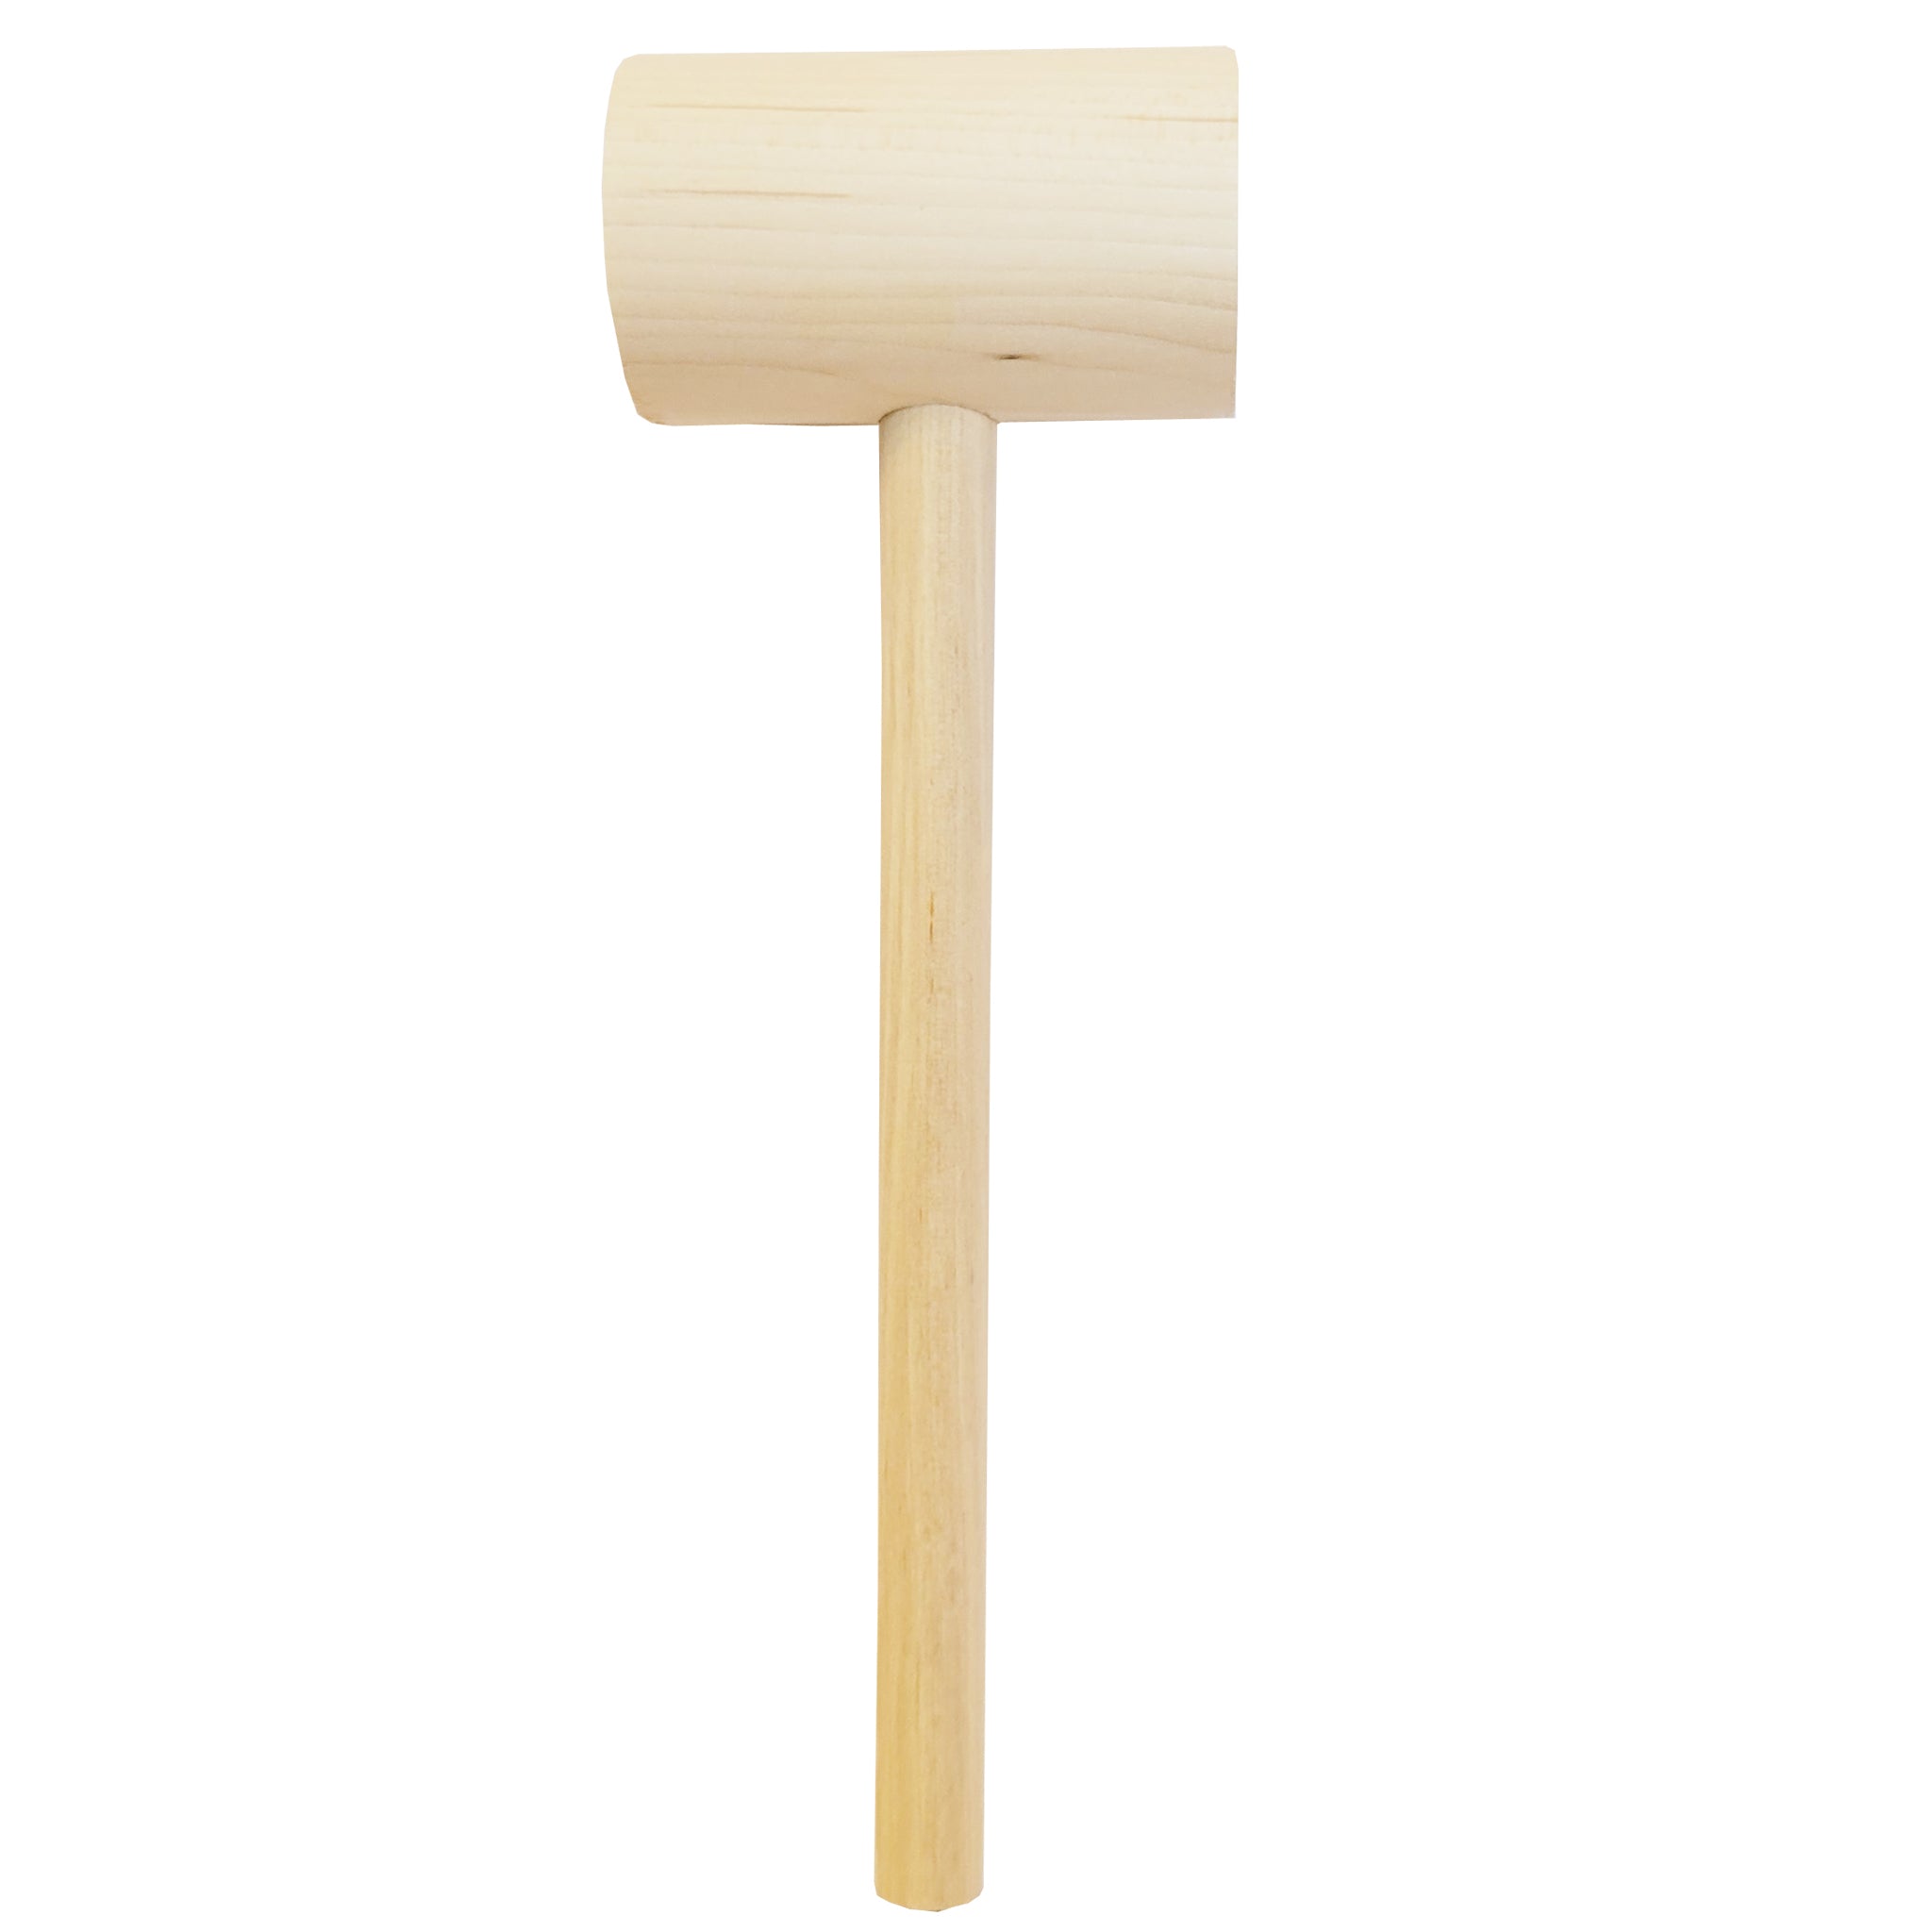 Mallets, Crackers, Tools* :: (1) Wooden Crab Mallet - Maryland